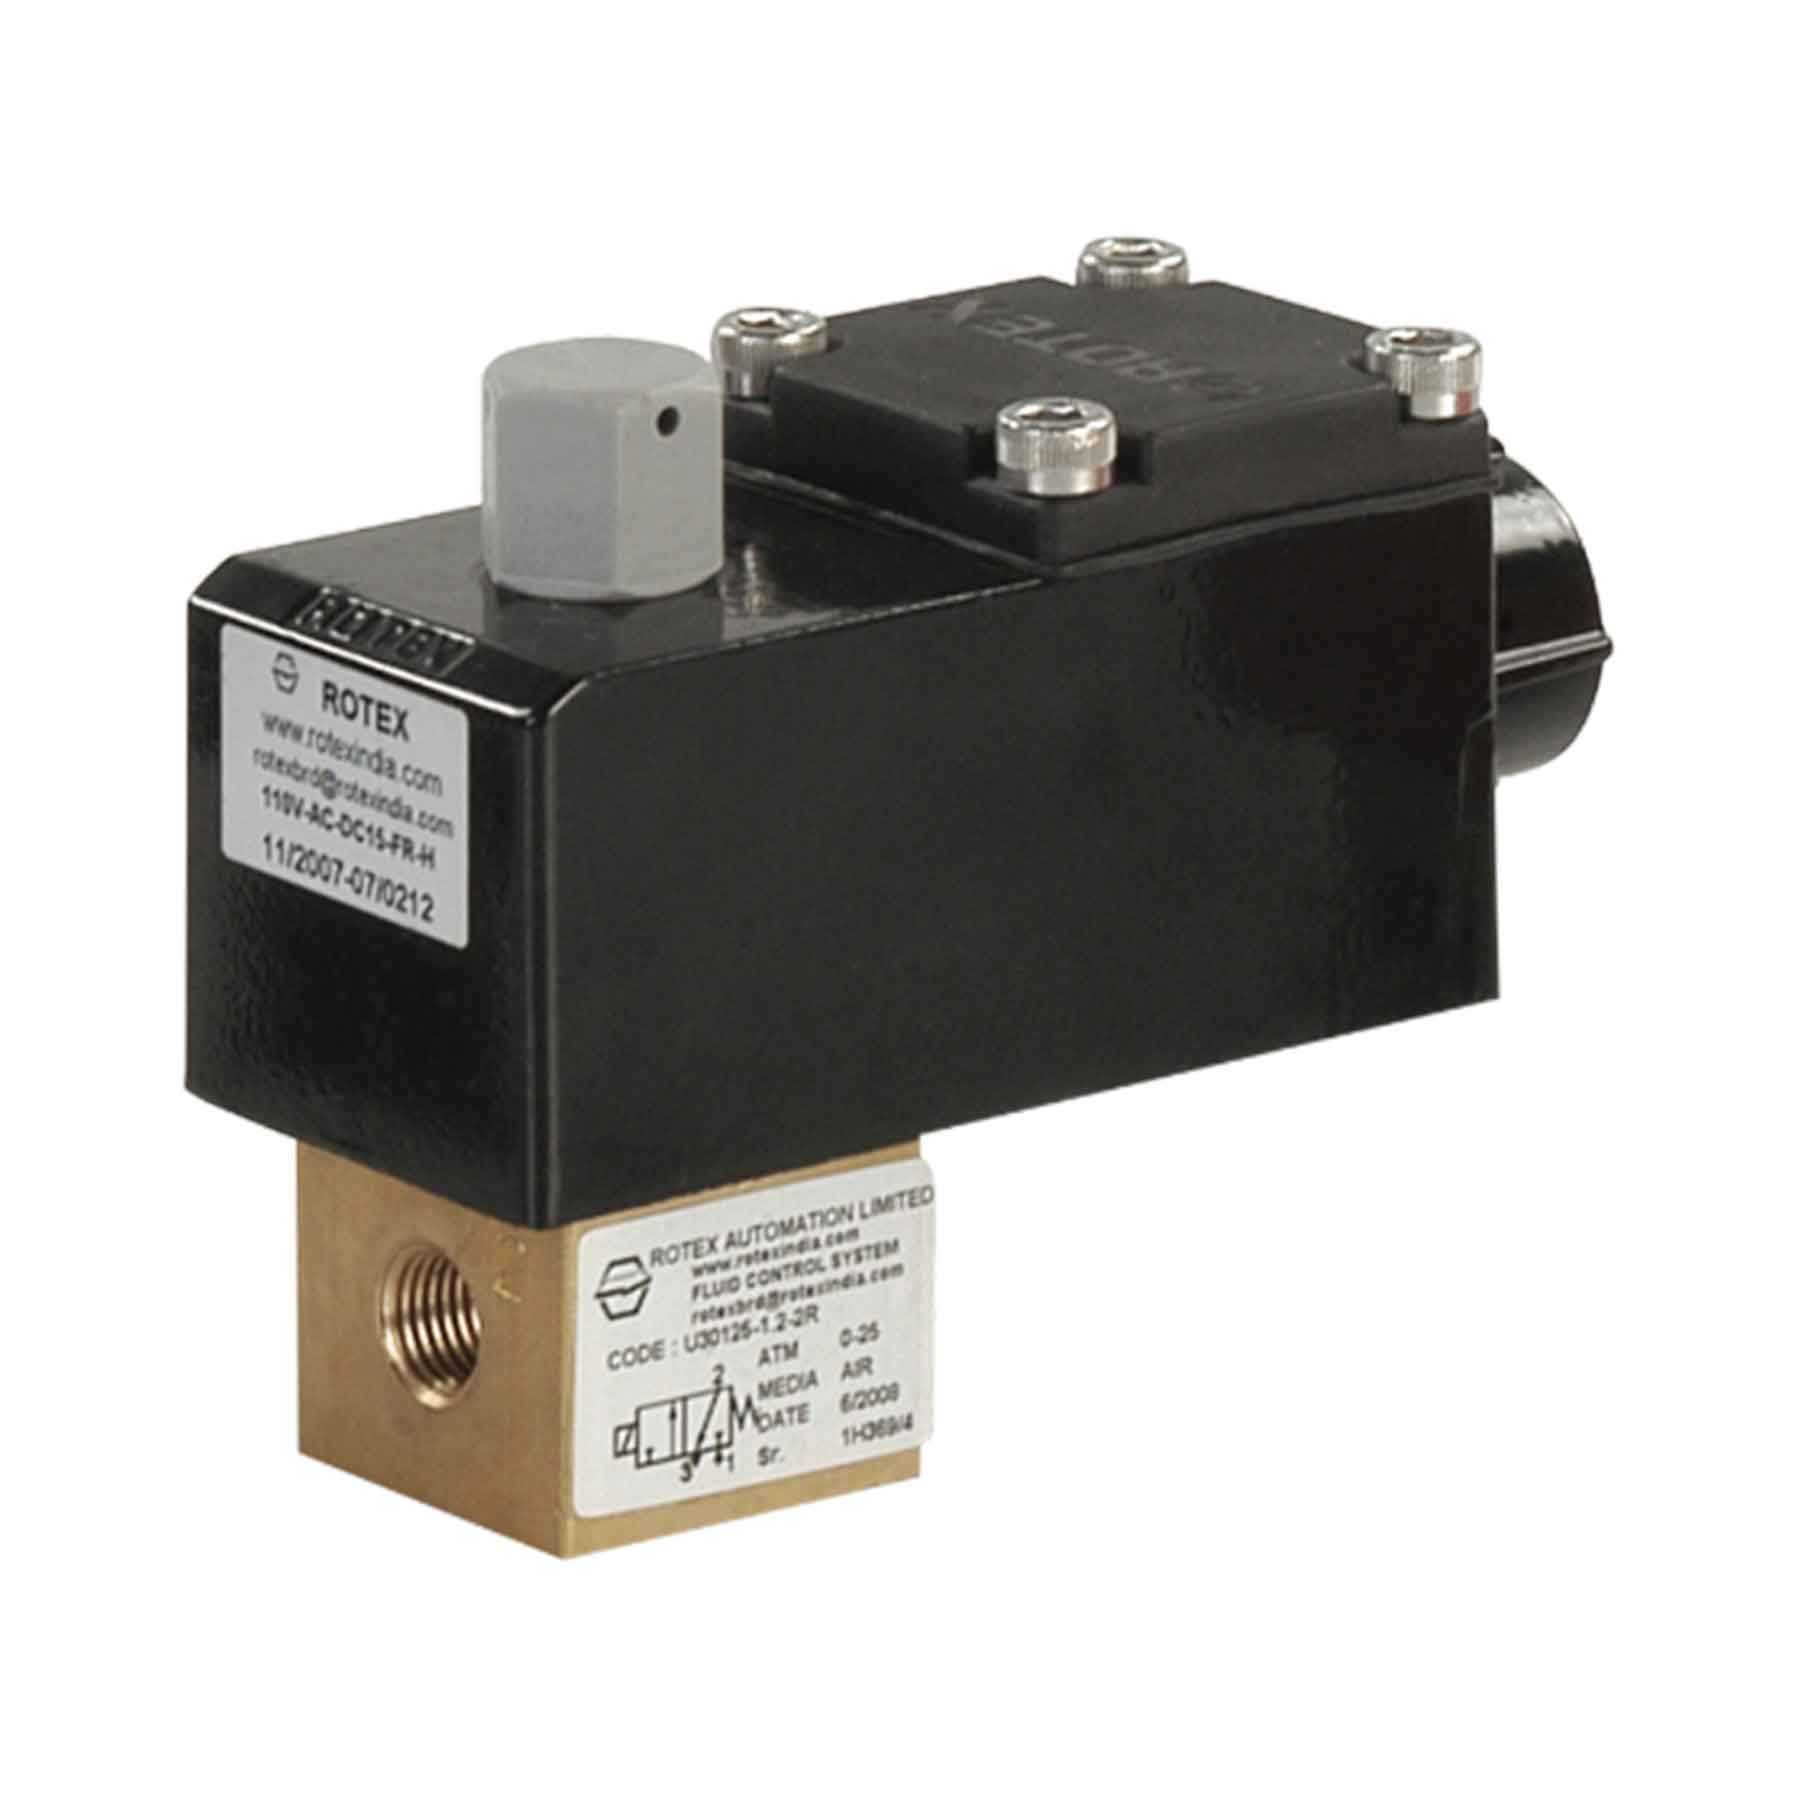 Rotex 2/2-Way Normally Closed Direct Lift Solenoid Valve 20101-2.2-2R-B5-S2+I-230V-50HZ-22-H-CE